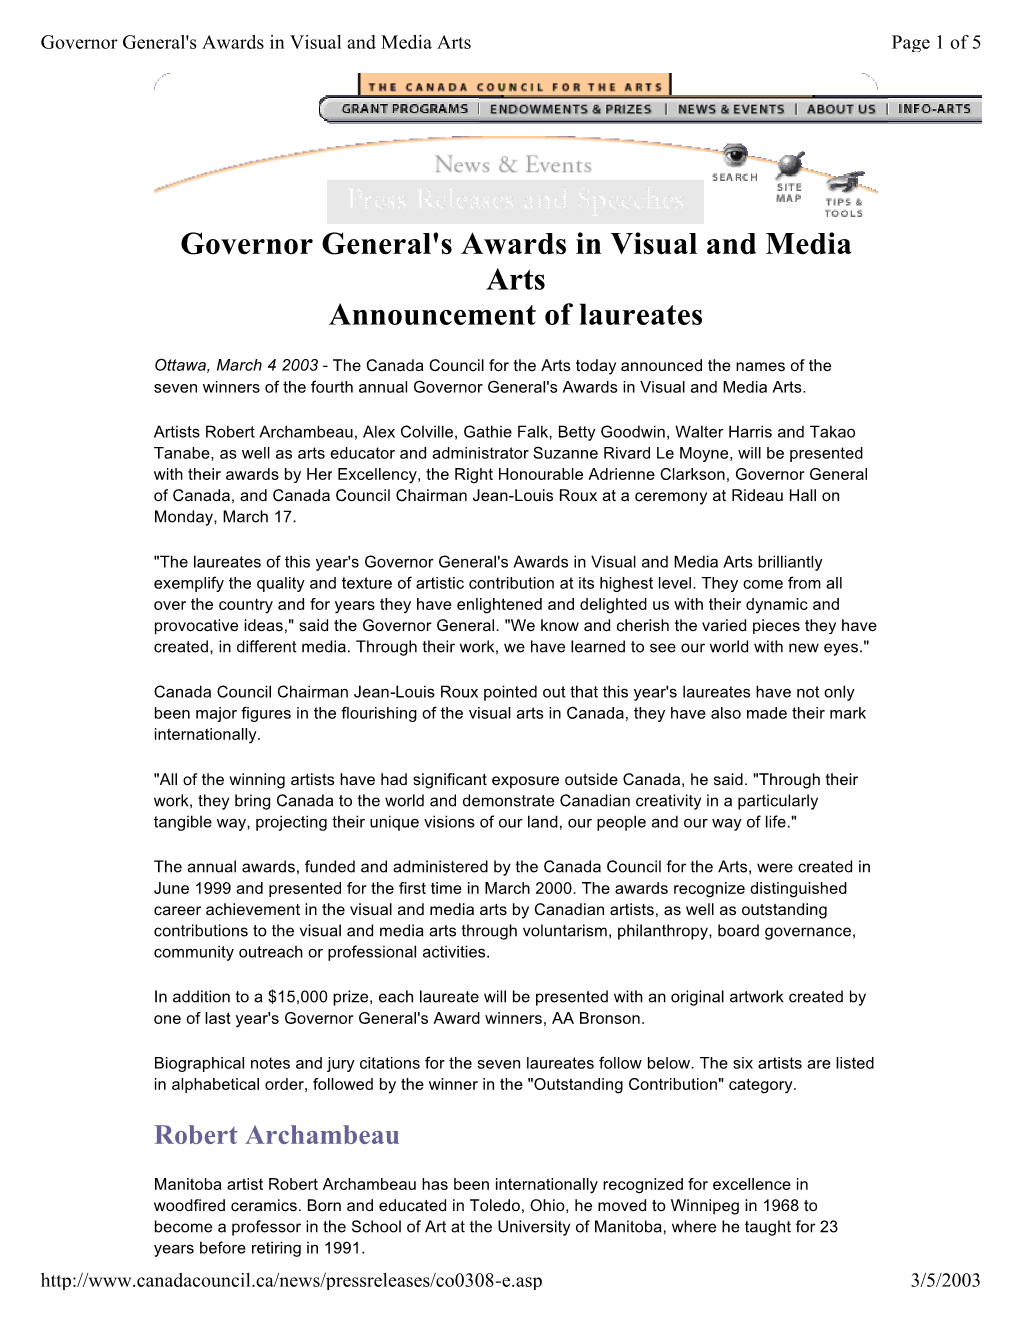 Governor General's Awards in Visual and Media Arts Announcement of Laureates